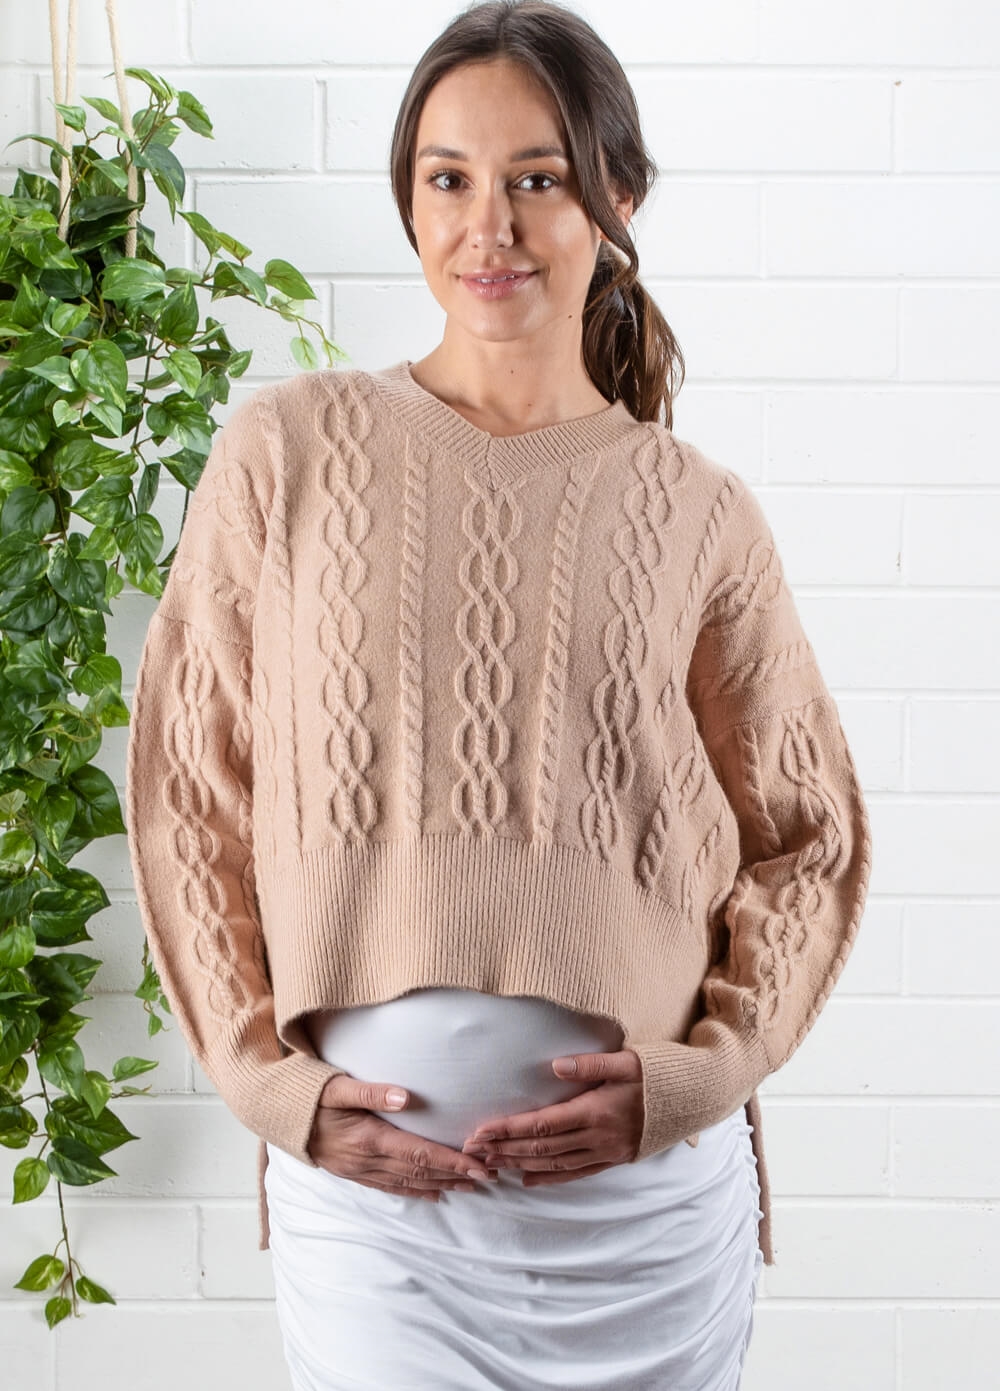 Lait & Co - Josie Cable Knit Cropped Jumper in Camel | Queen Bee